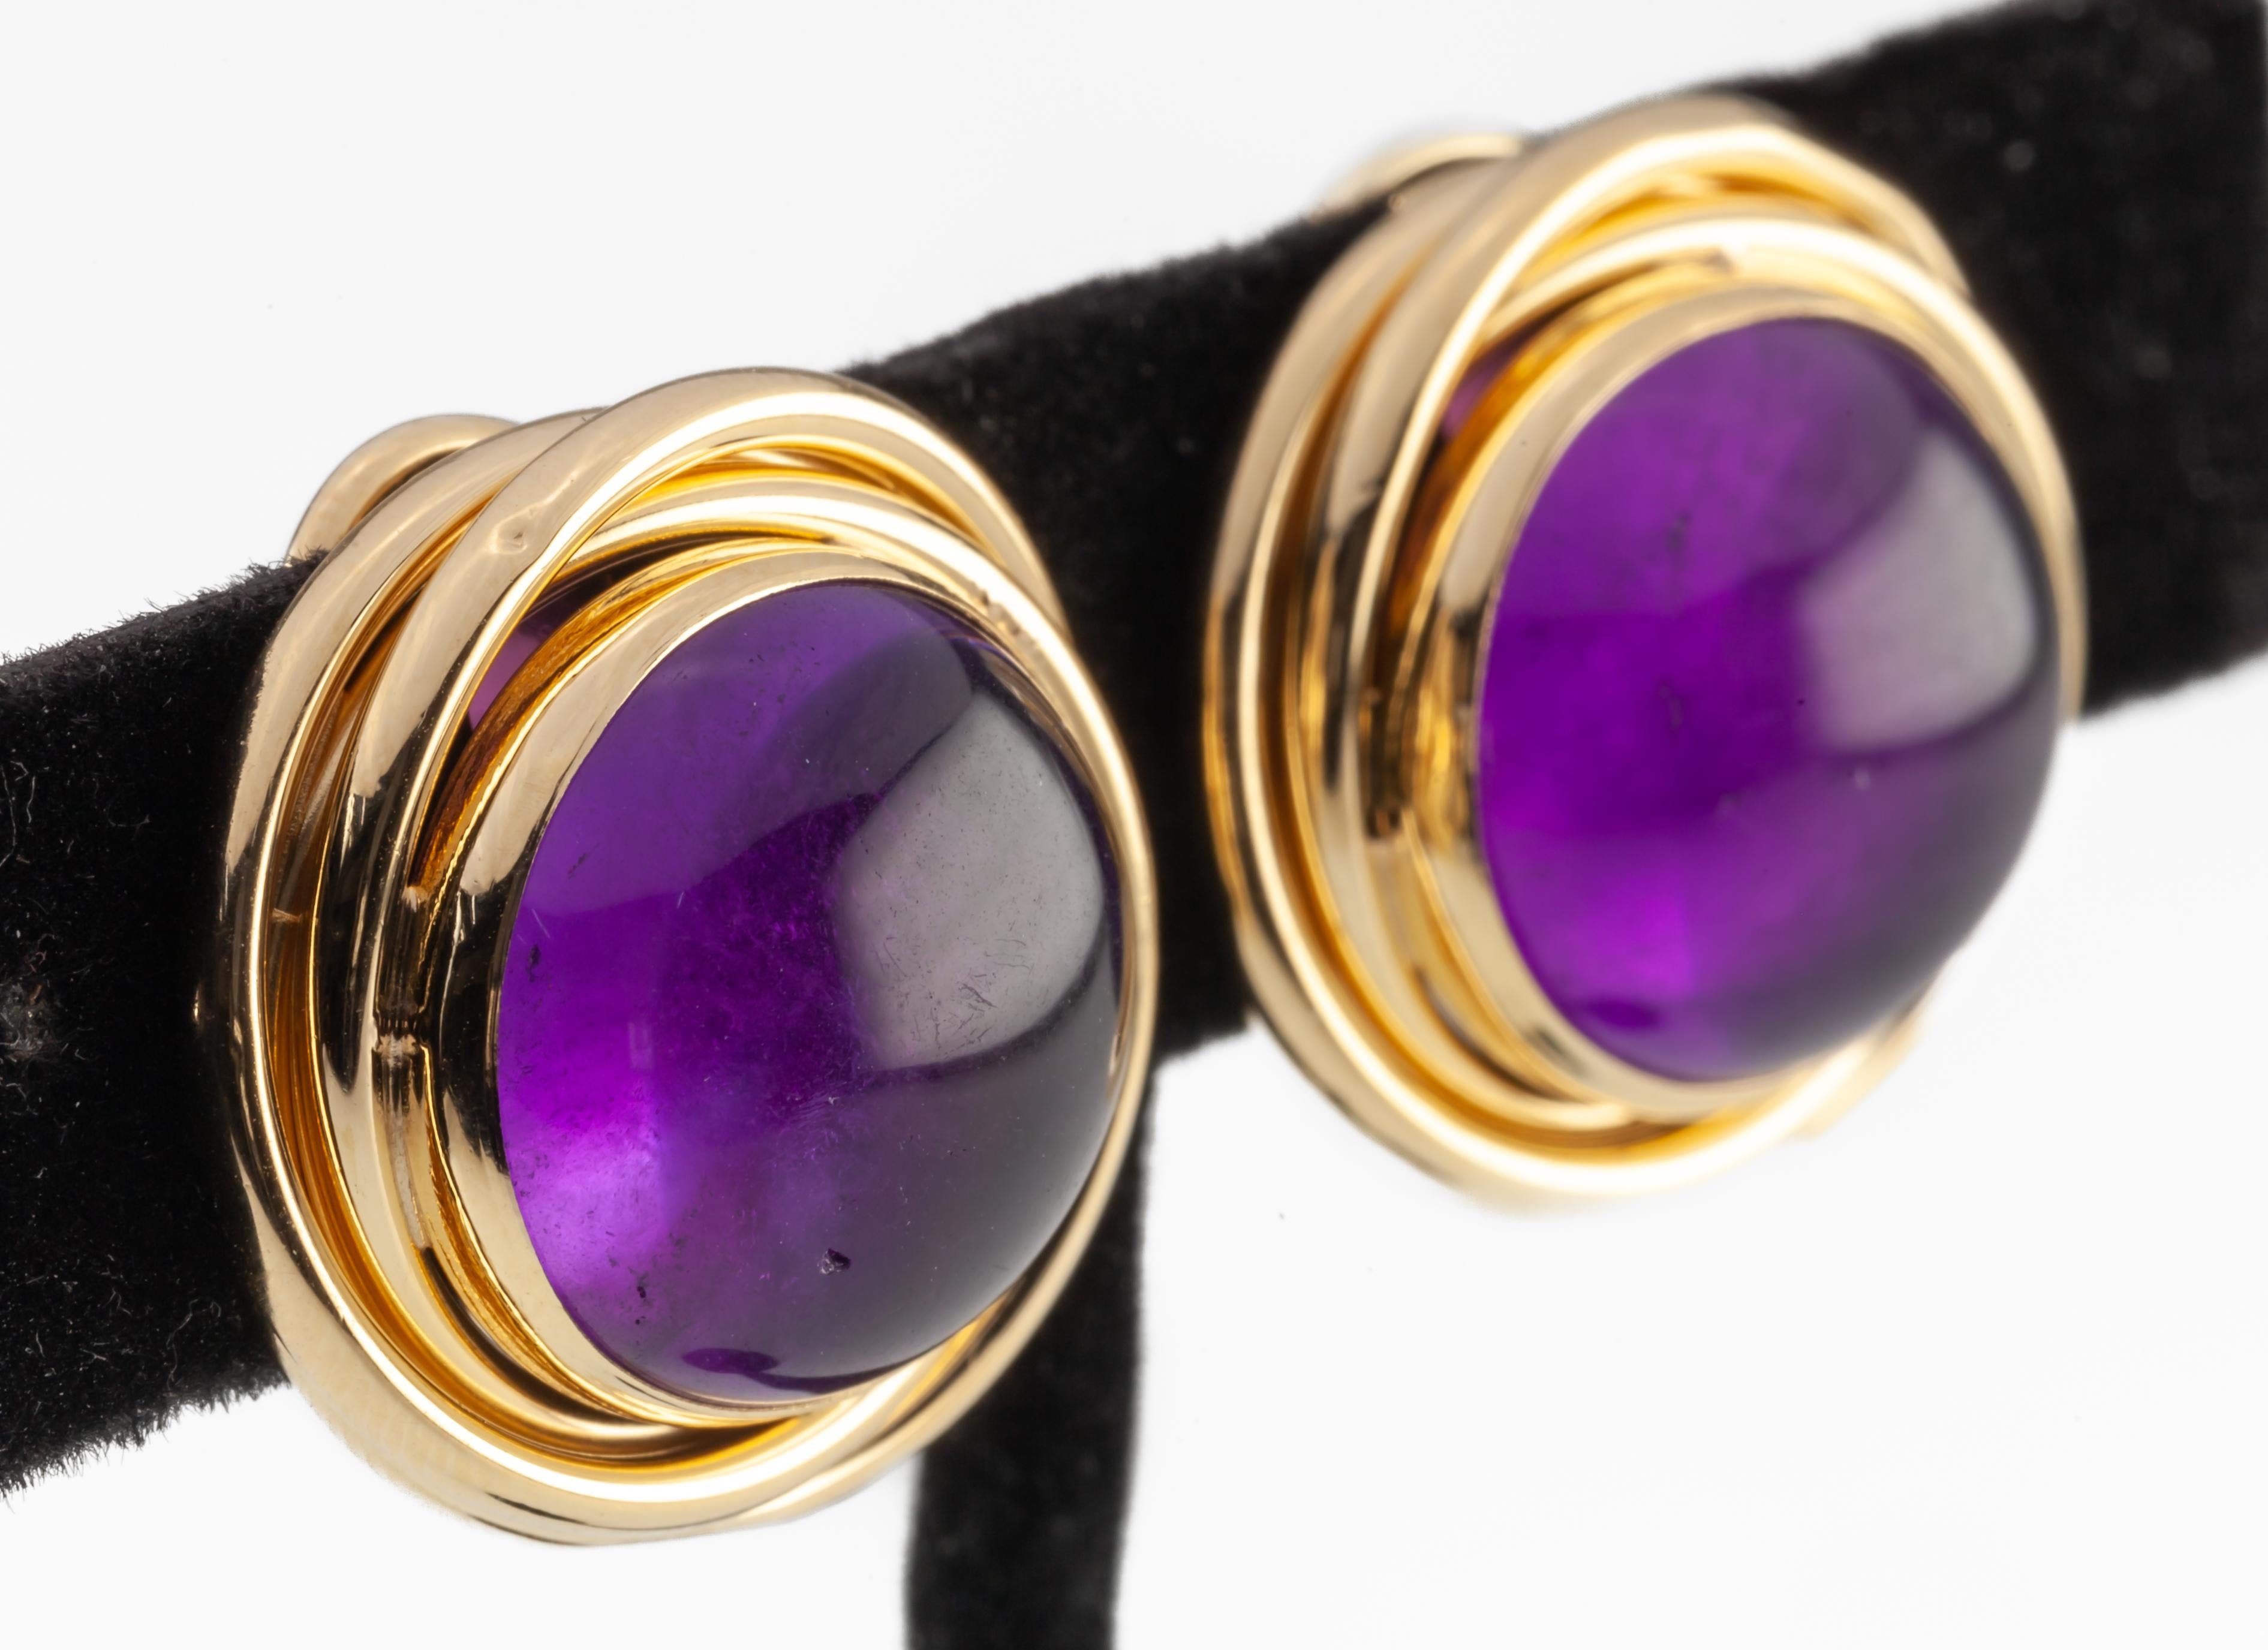 14k Yellow Gold Peter Brams 2 Carat Amethyst Cabochon Clip-On Earrings Gorgeous For Sale 1